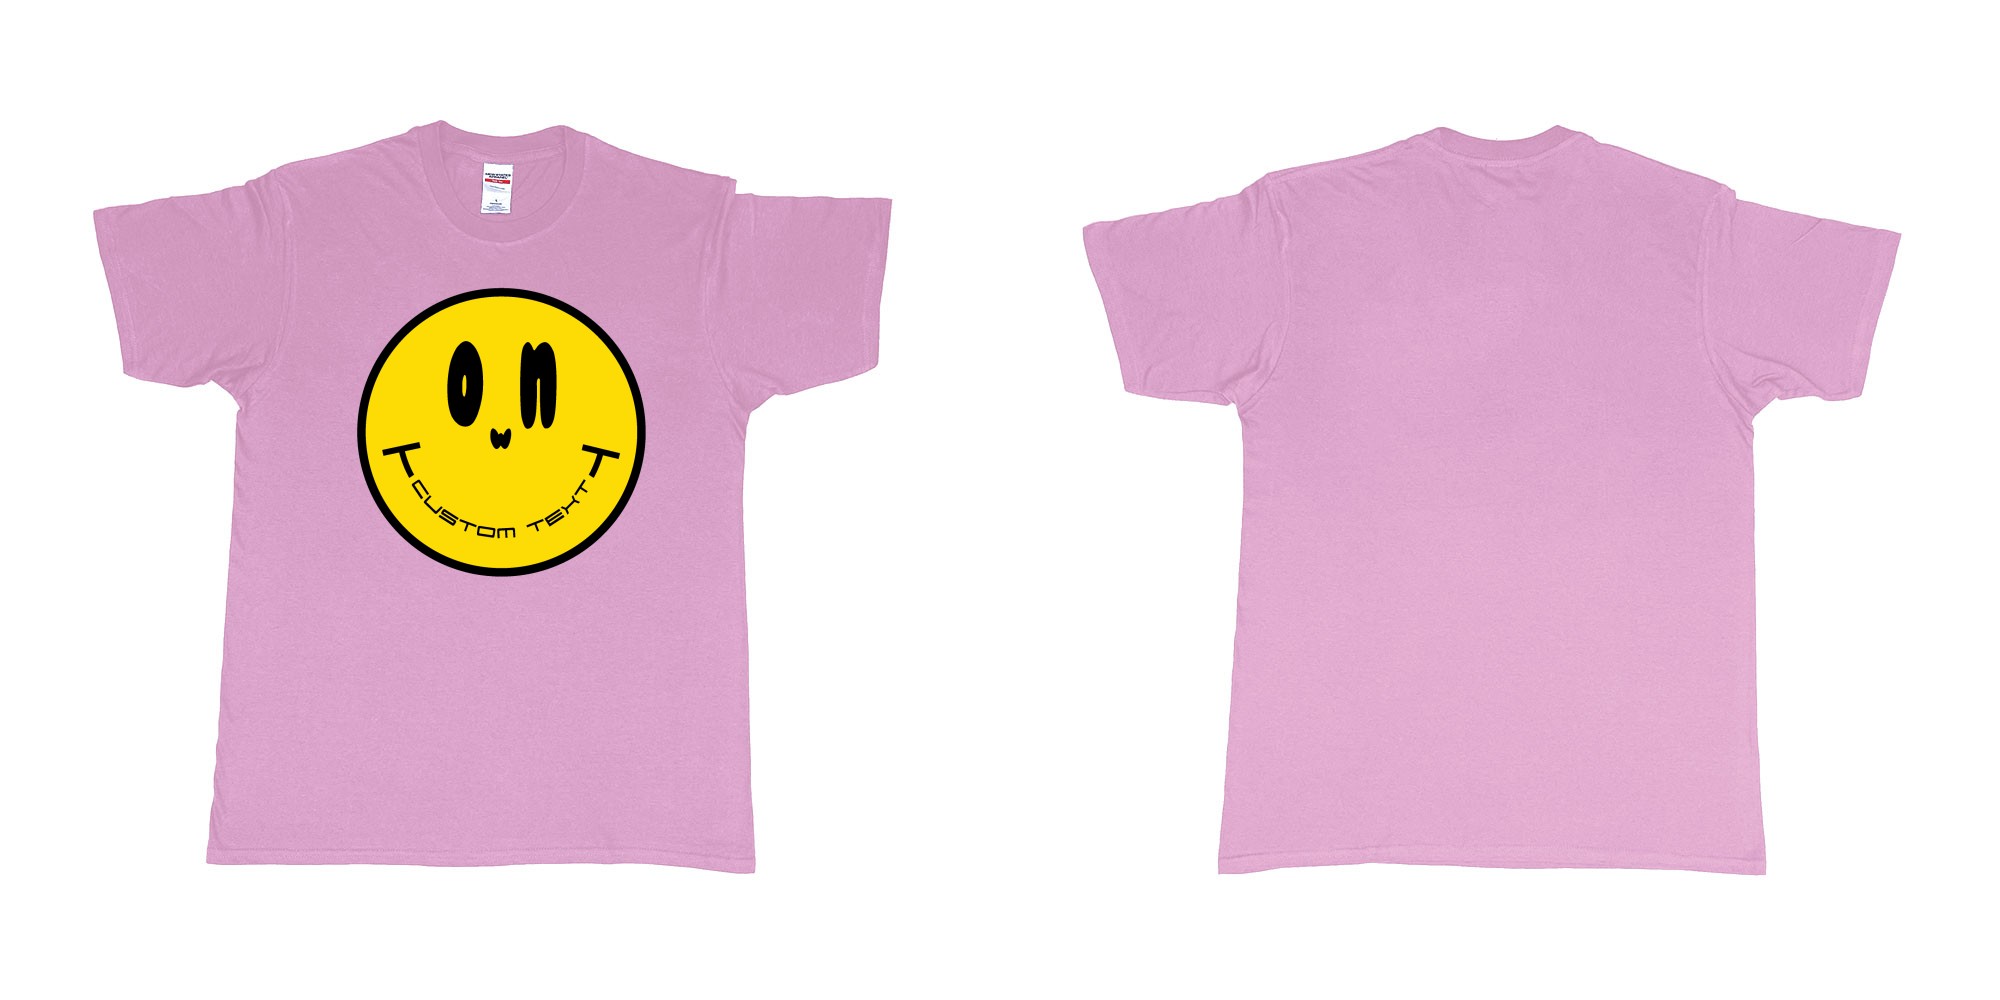 Custom tshirt design smiley face emoji custom text in fabric color light-pink choice your own text made in Bali by The Pirate Way